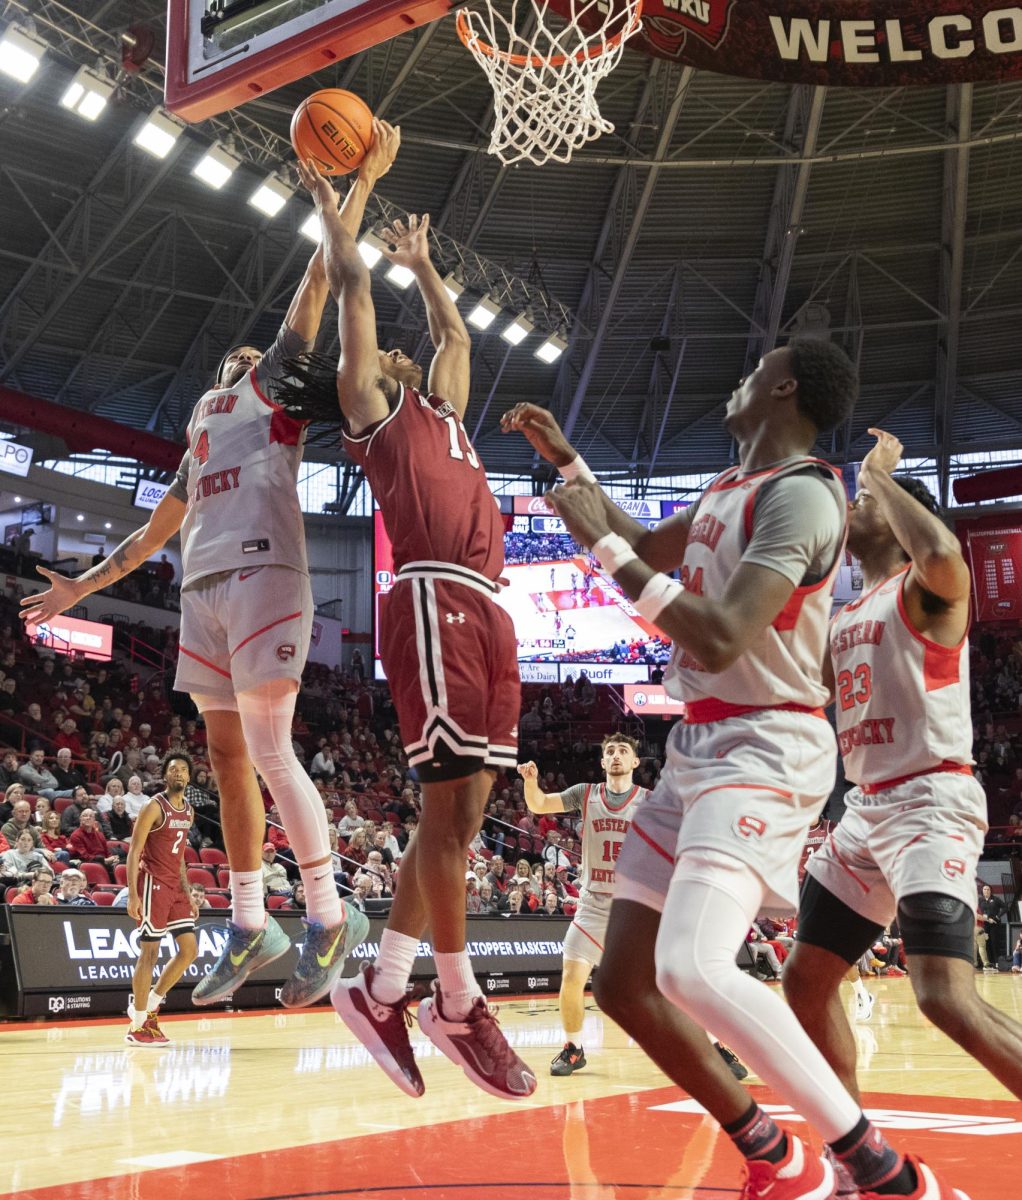 WKU guard Christian Lander (4) competes for a rebound with NMSU guard Jaden Harris (13) in WKU’s Senior Night game in the Diddle Arena on Feb 17.